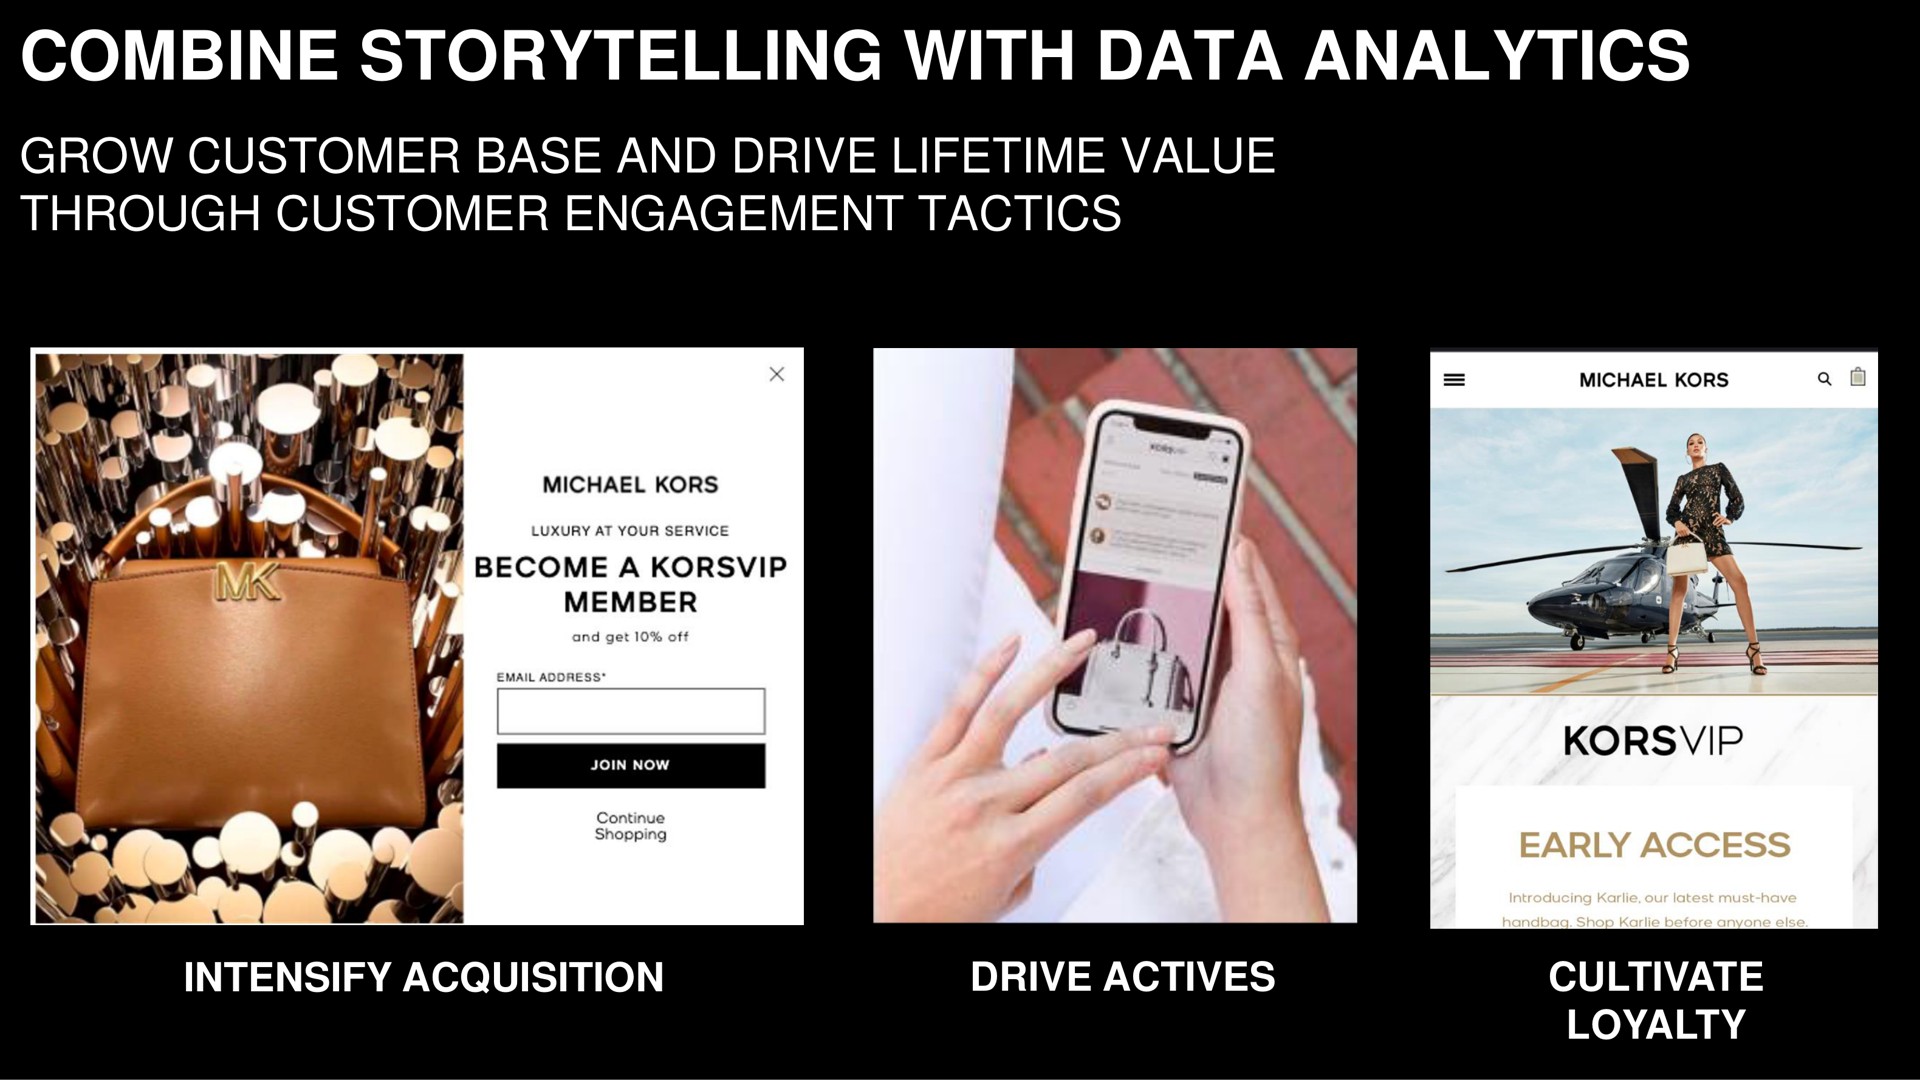 combine storytelling with data analytics grow customer base and drive lifetime value through customer engagement tactics intensify acquisition drive actives ore am loyalty | Capri Holdings